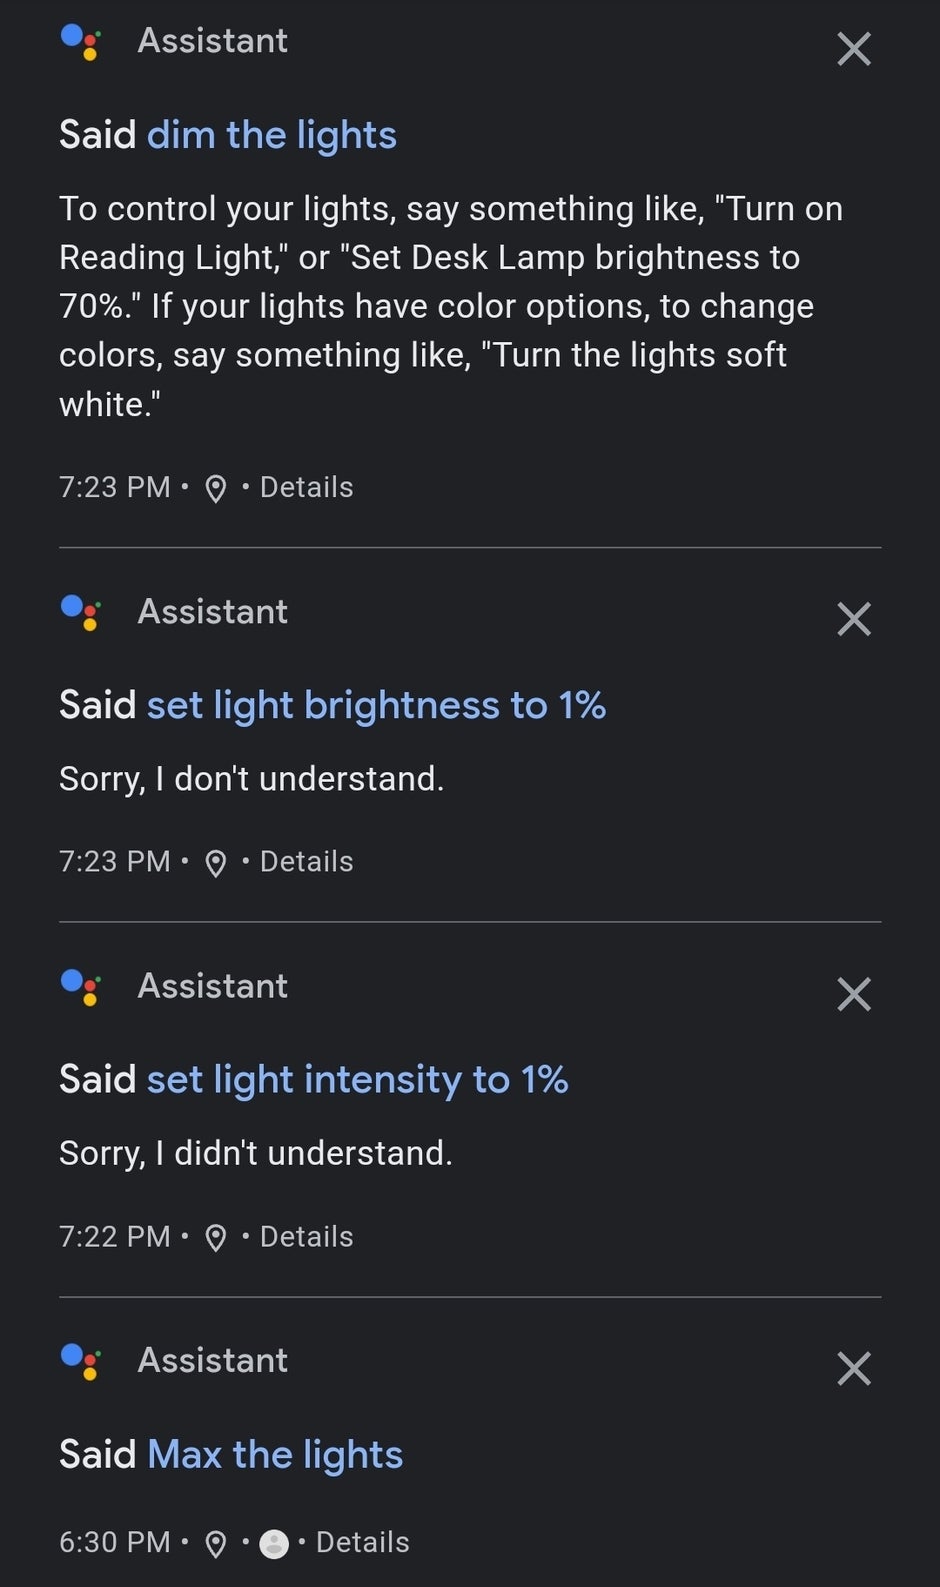 An issue with Google Assistant may prevent you from controlling lights